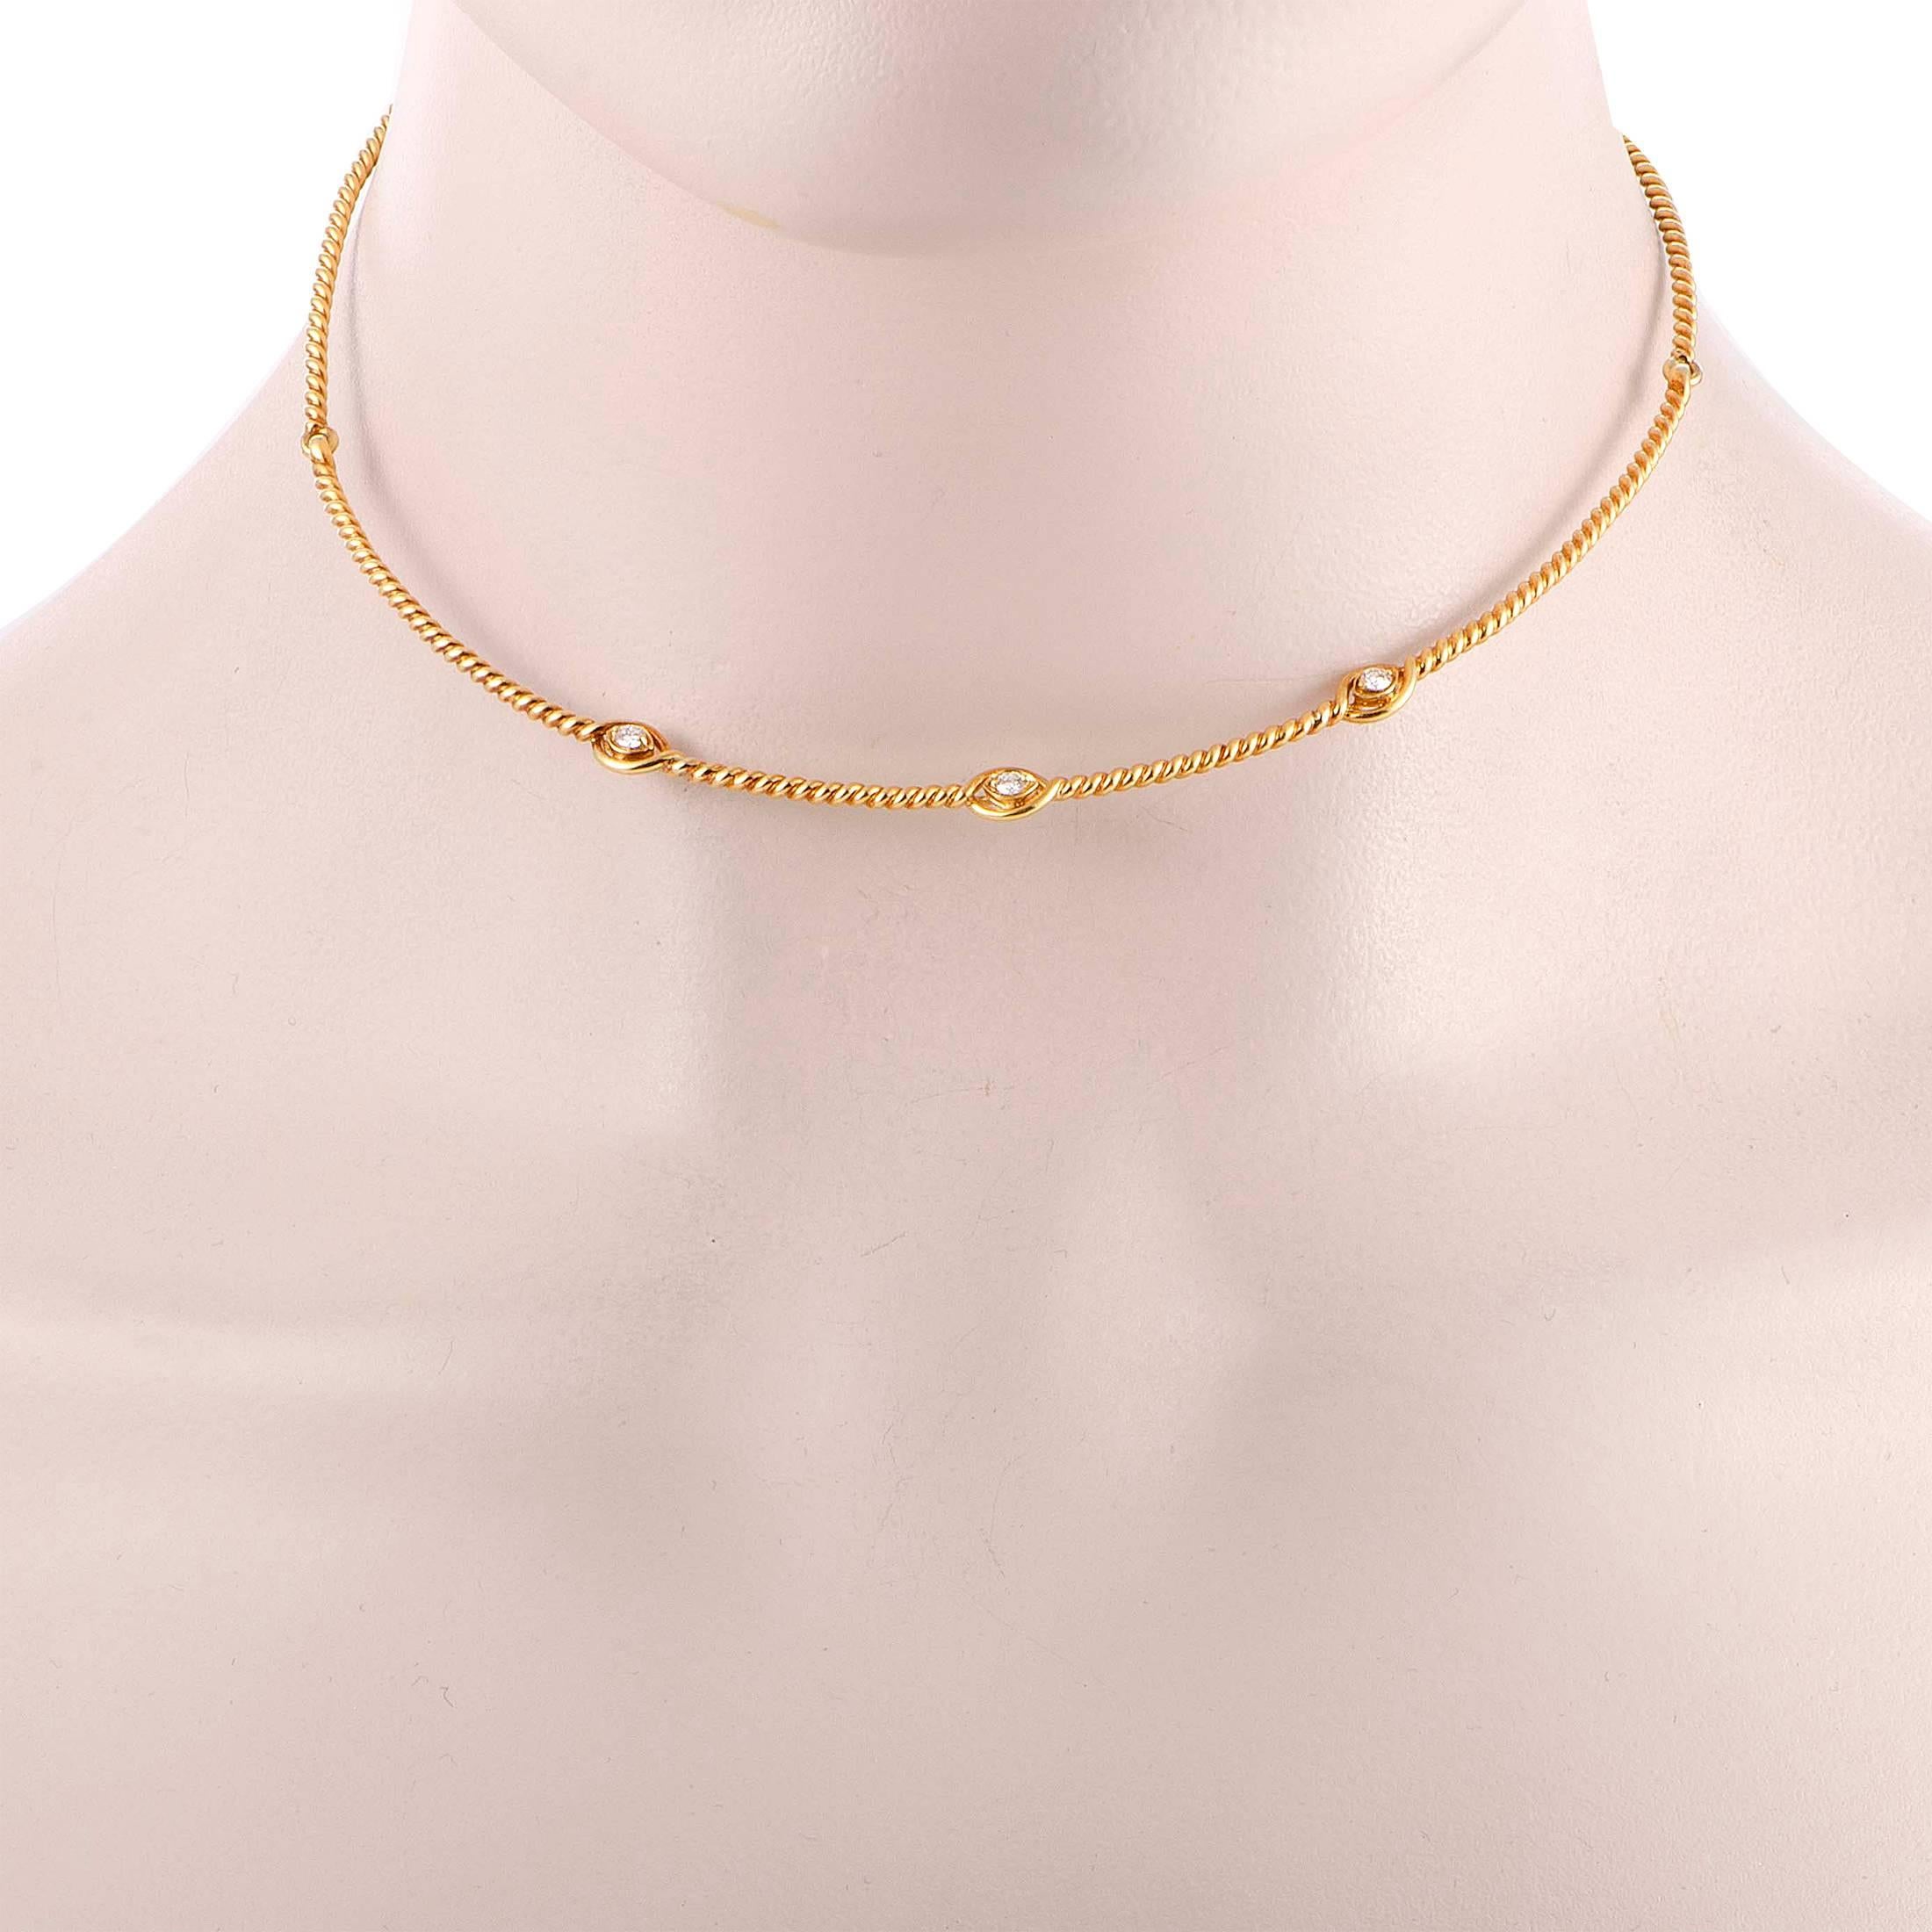 This absolutely elegant necklace by Dior is a sheer beauty! Its simple yet graceful design is made in 18K yellow gold and has three dazzling diamond stones that weigh .24ct in total and enhance the glamorous appeal of this stunning necklace.
